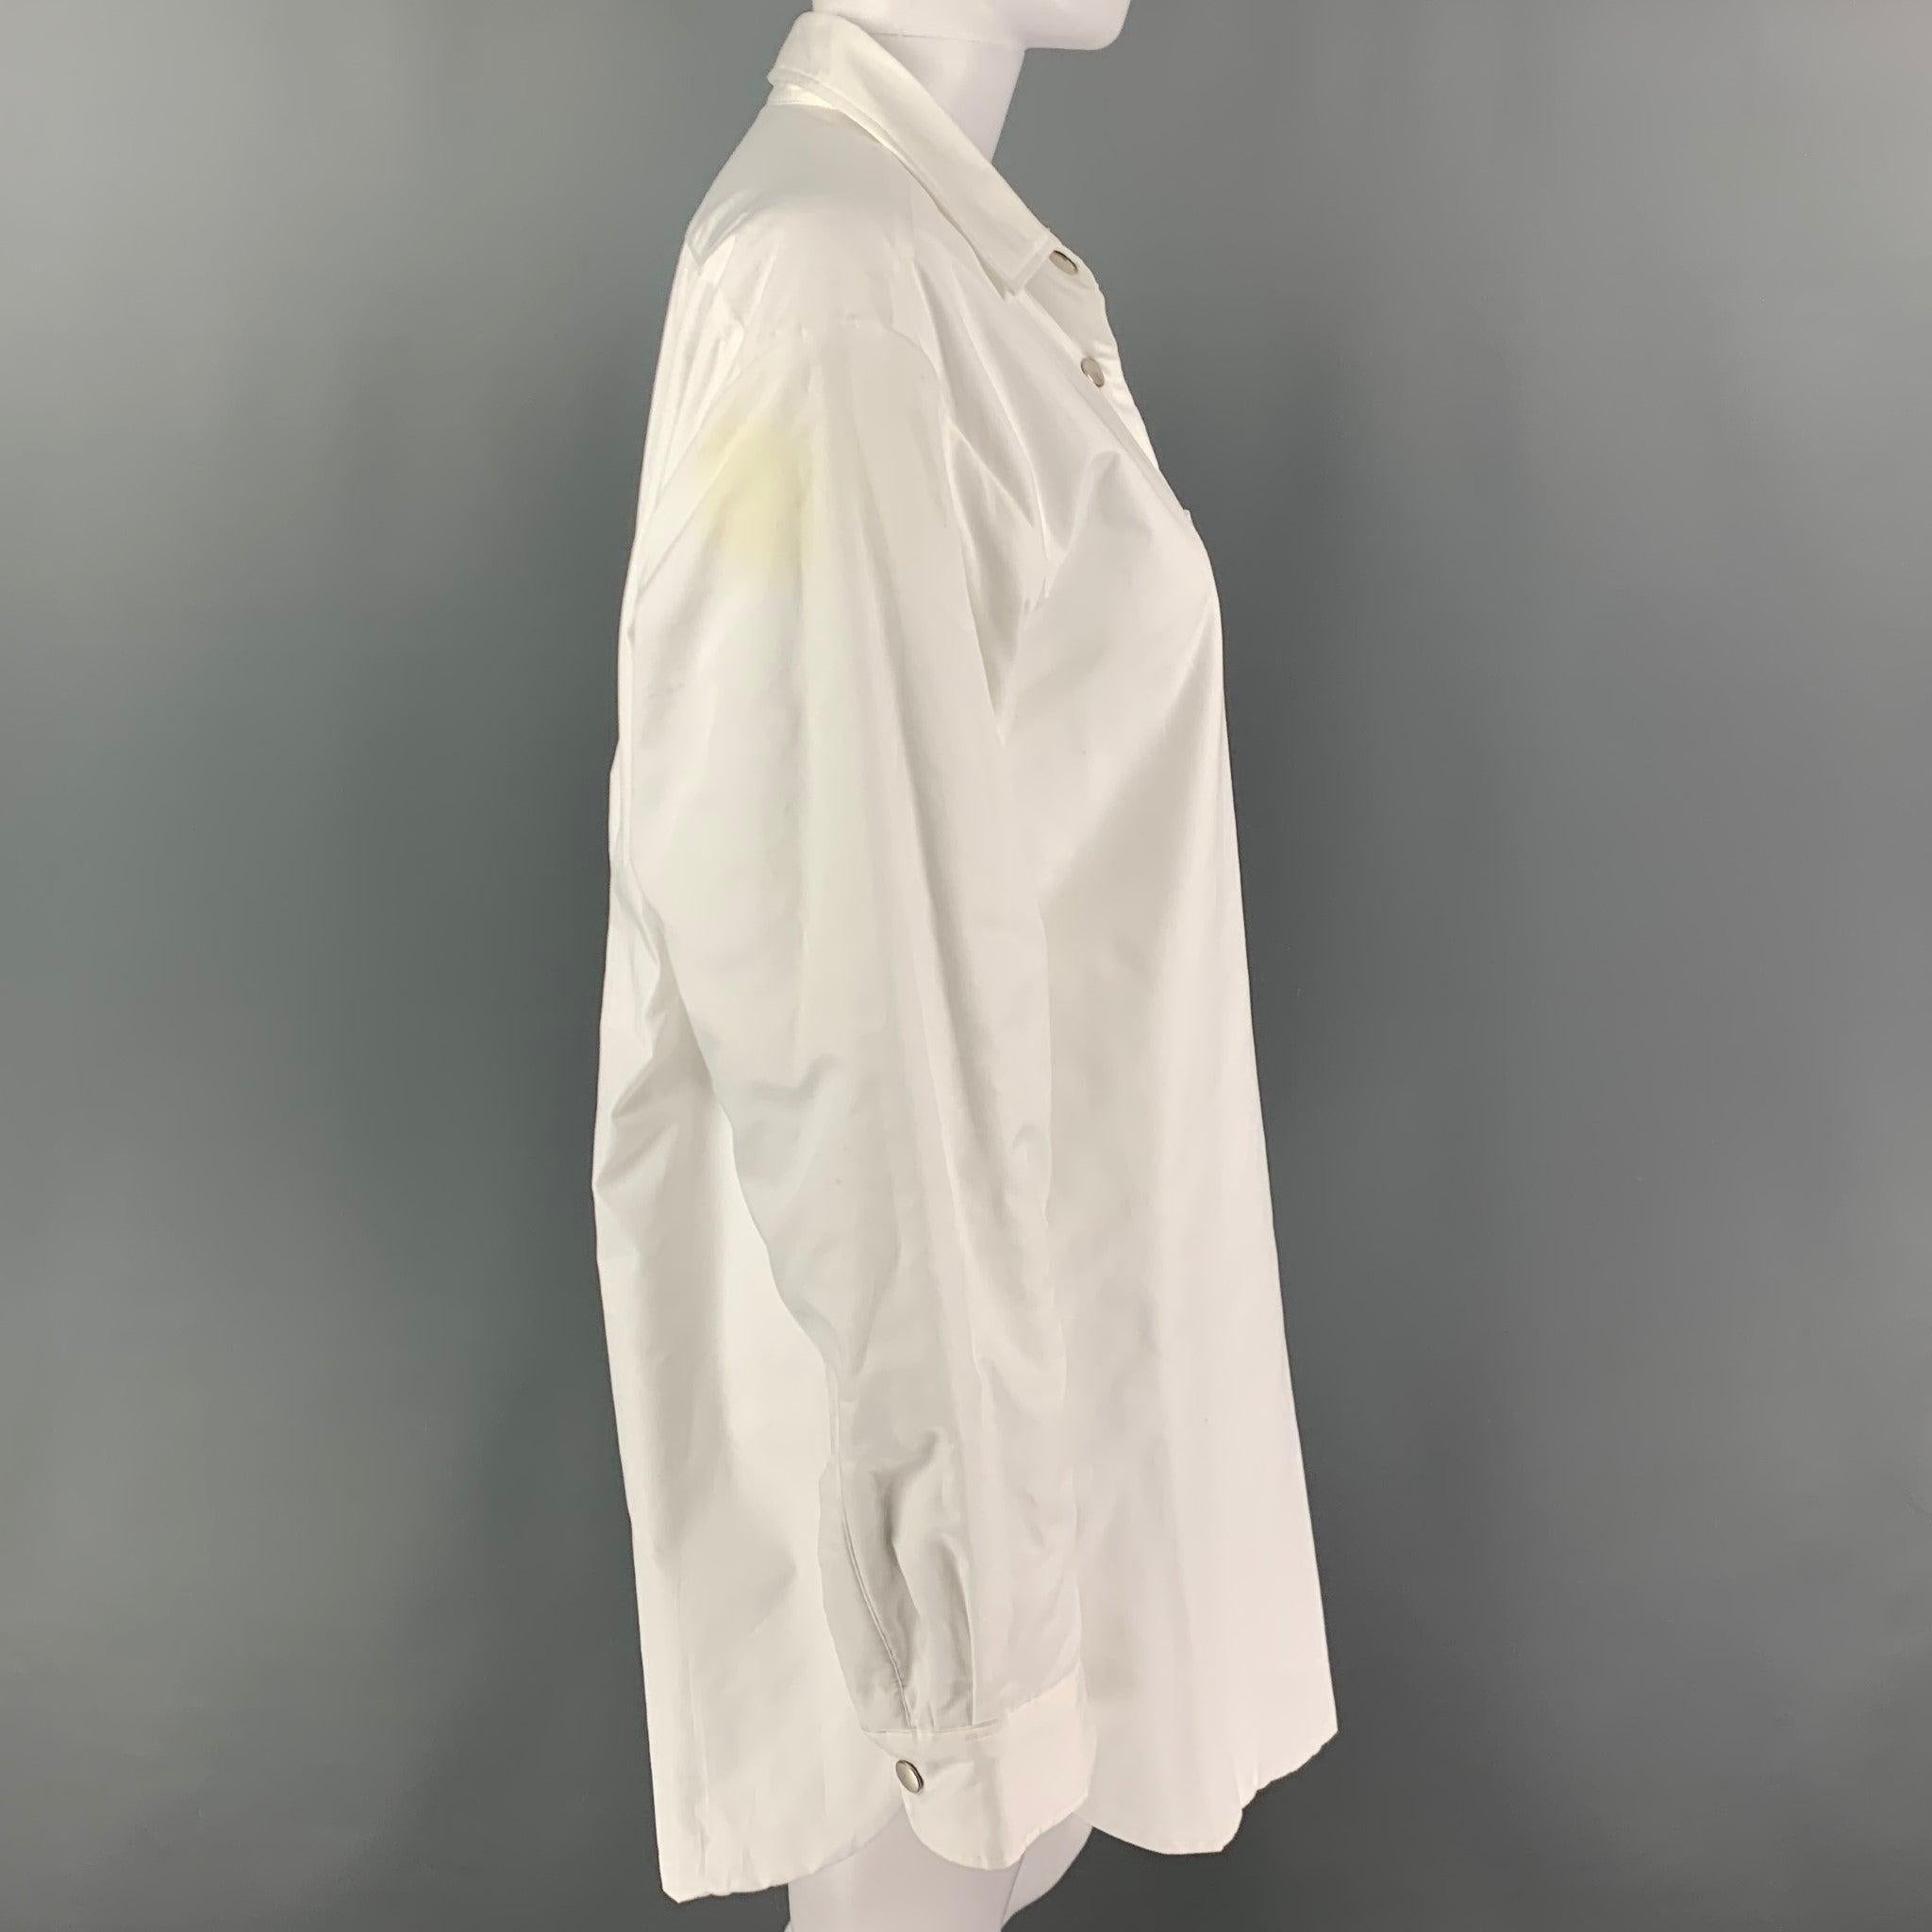 DRIES VAN NOTEN x LEN LYE jacket shirt comes in a white padded cotton featuring a oversized fit, pointed collar, patch pocket, and a snap button closure.
Good
Pre-Owned Condition.
Minor discoloration at sleeve. As-is.  

Marked:   M 

Measurements: